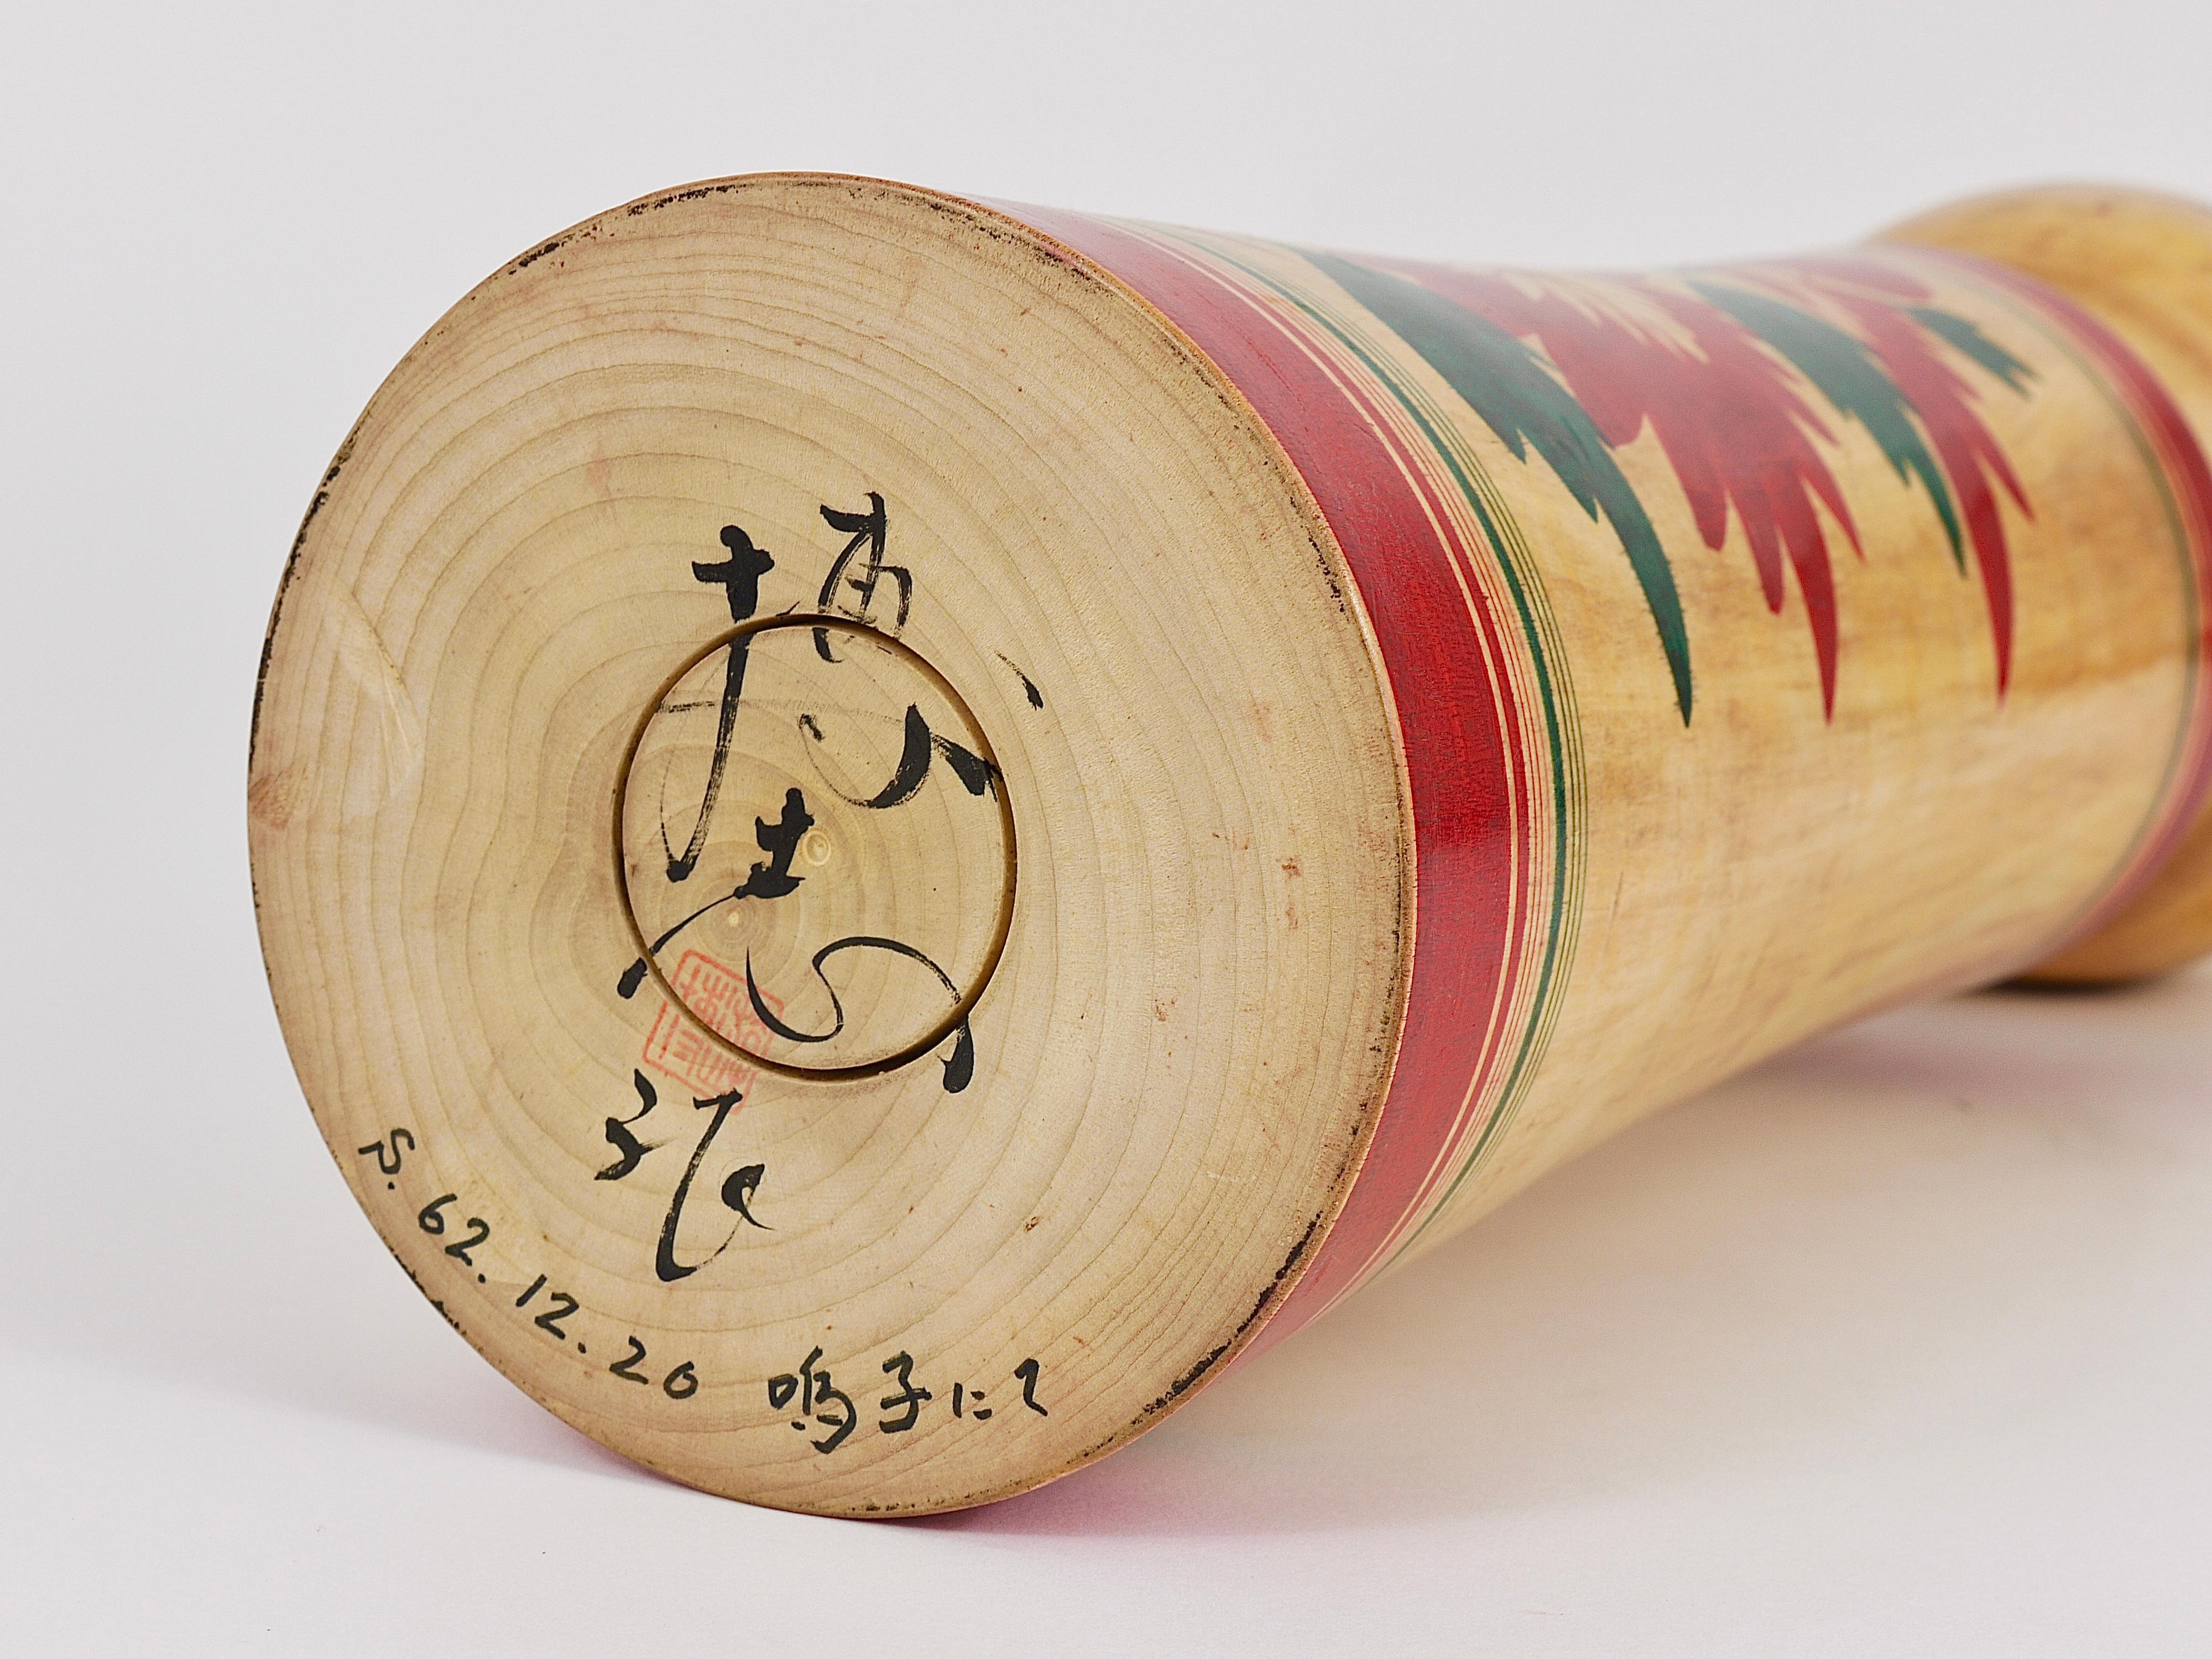 Wood Decorative Naruko Kokeshi Doll Sculpture from Northern Japan, Hand-Painted For Sale